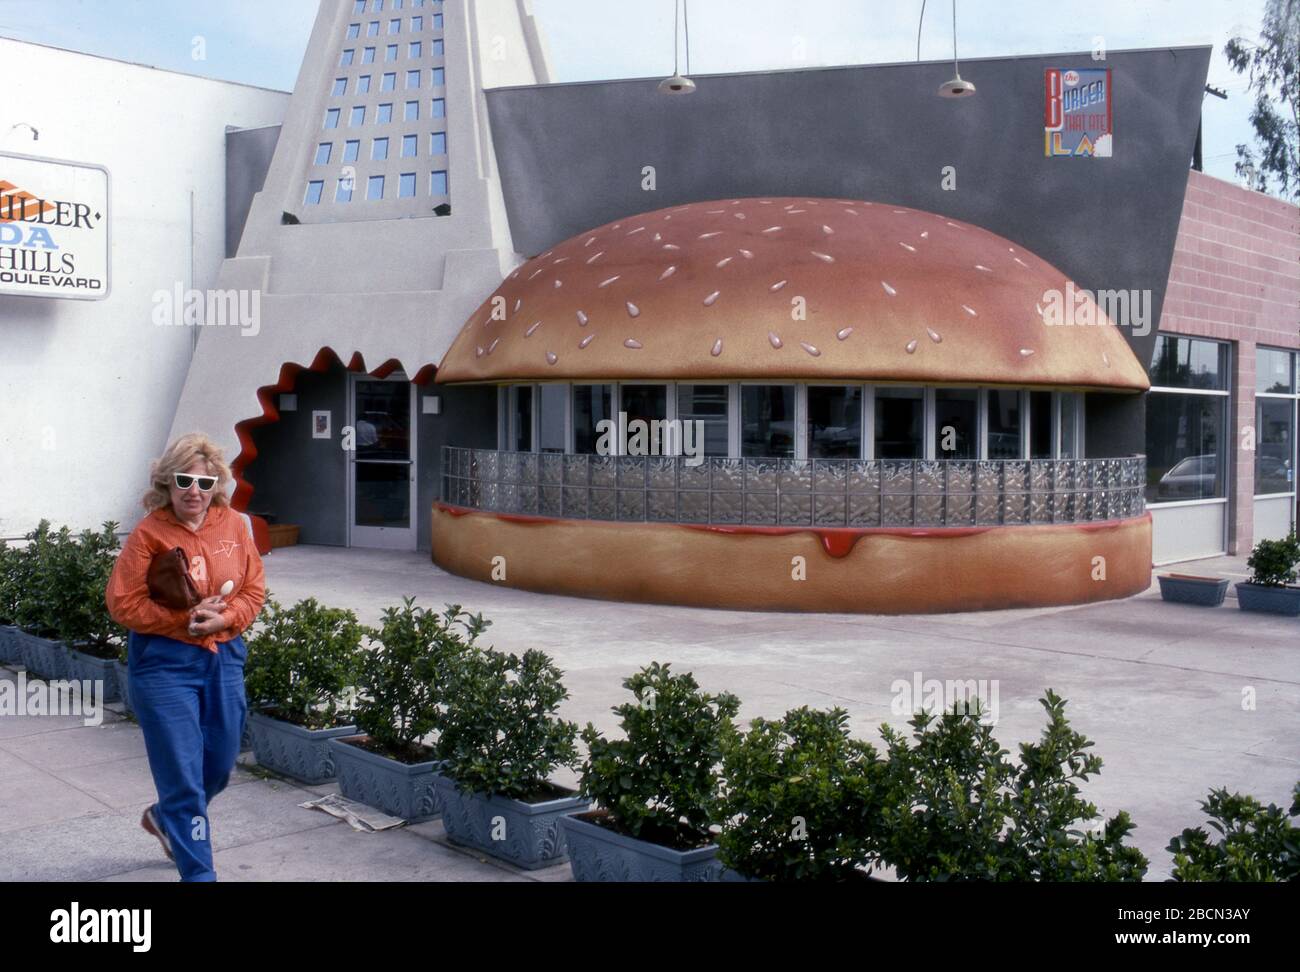 Restaurant shaped like a hamburger with a replica of L.A. City Hall was called 'The Burger That Ate L.A.' and was located on Melrose Avenue in West Hollywood, opened in 1989 and appeared in the pilot episode of the TV show, Melrose Place. Stock Photo